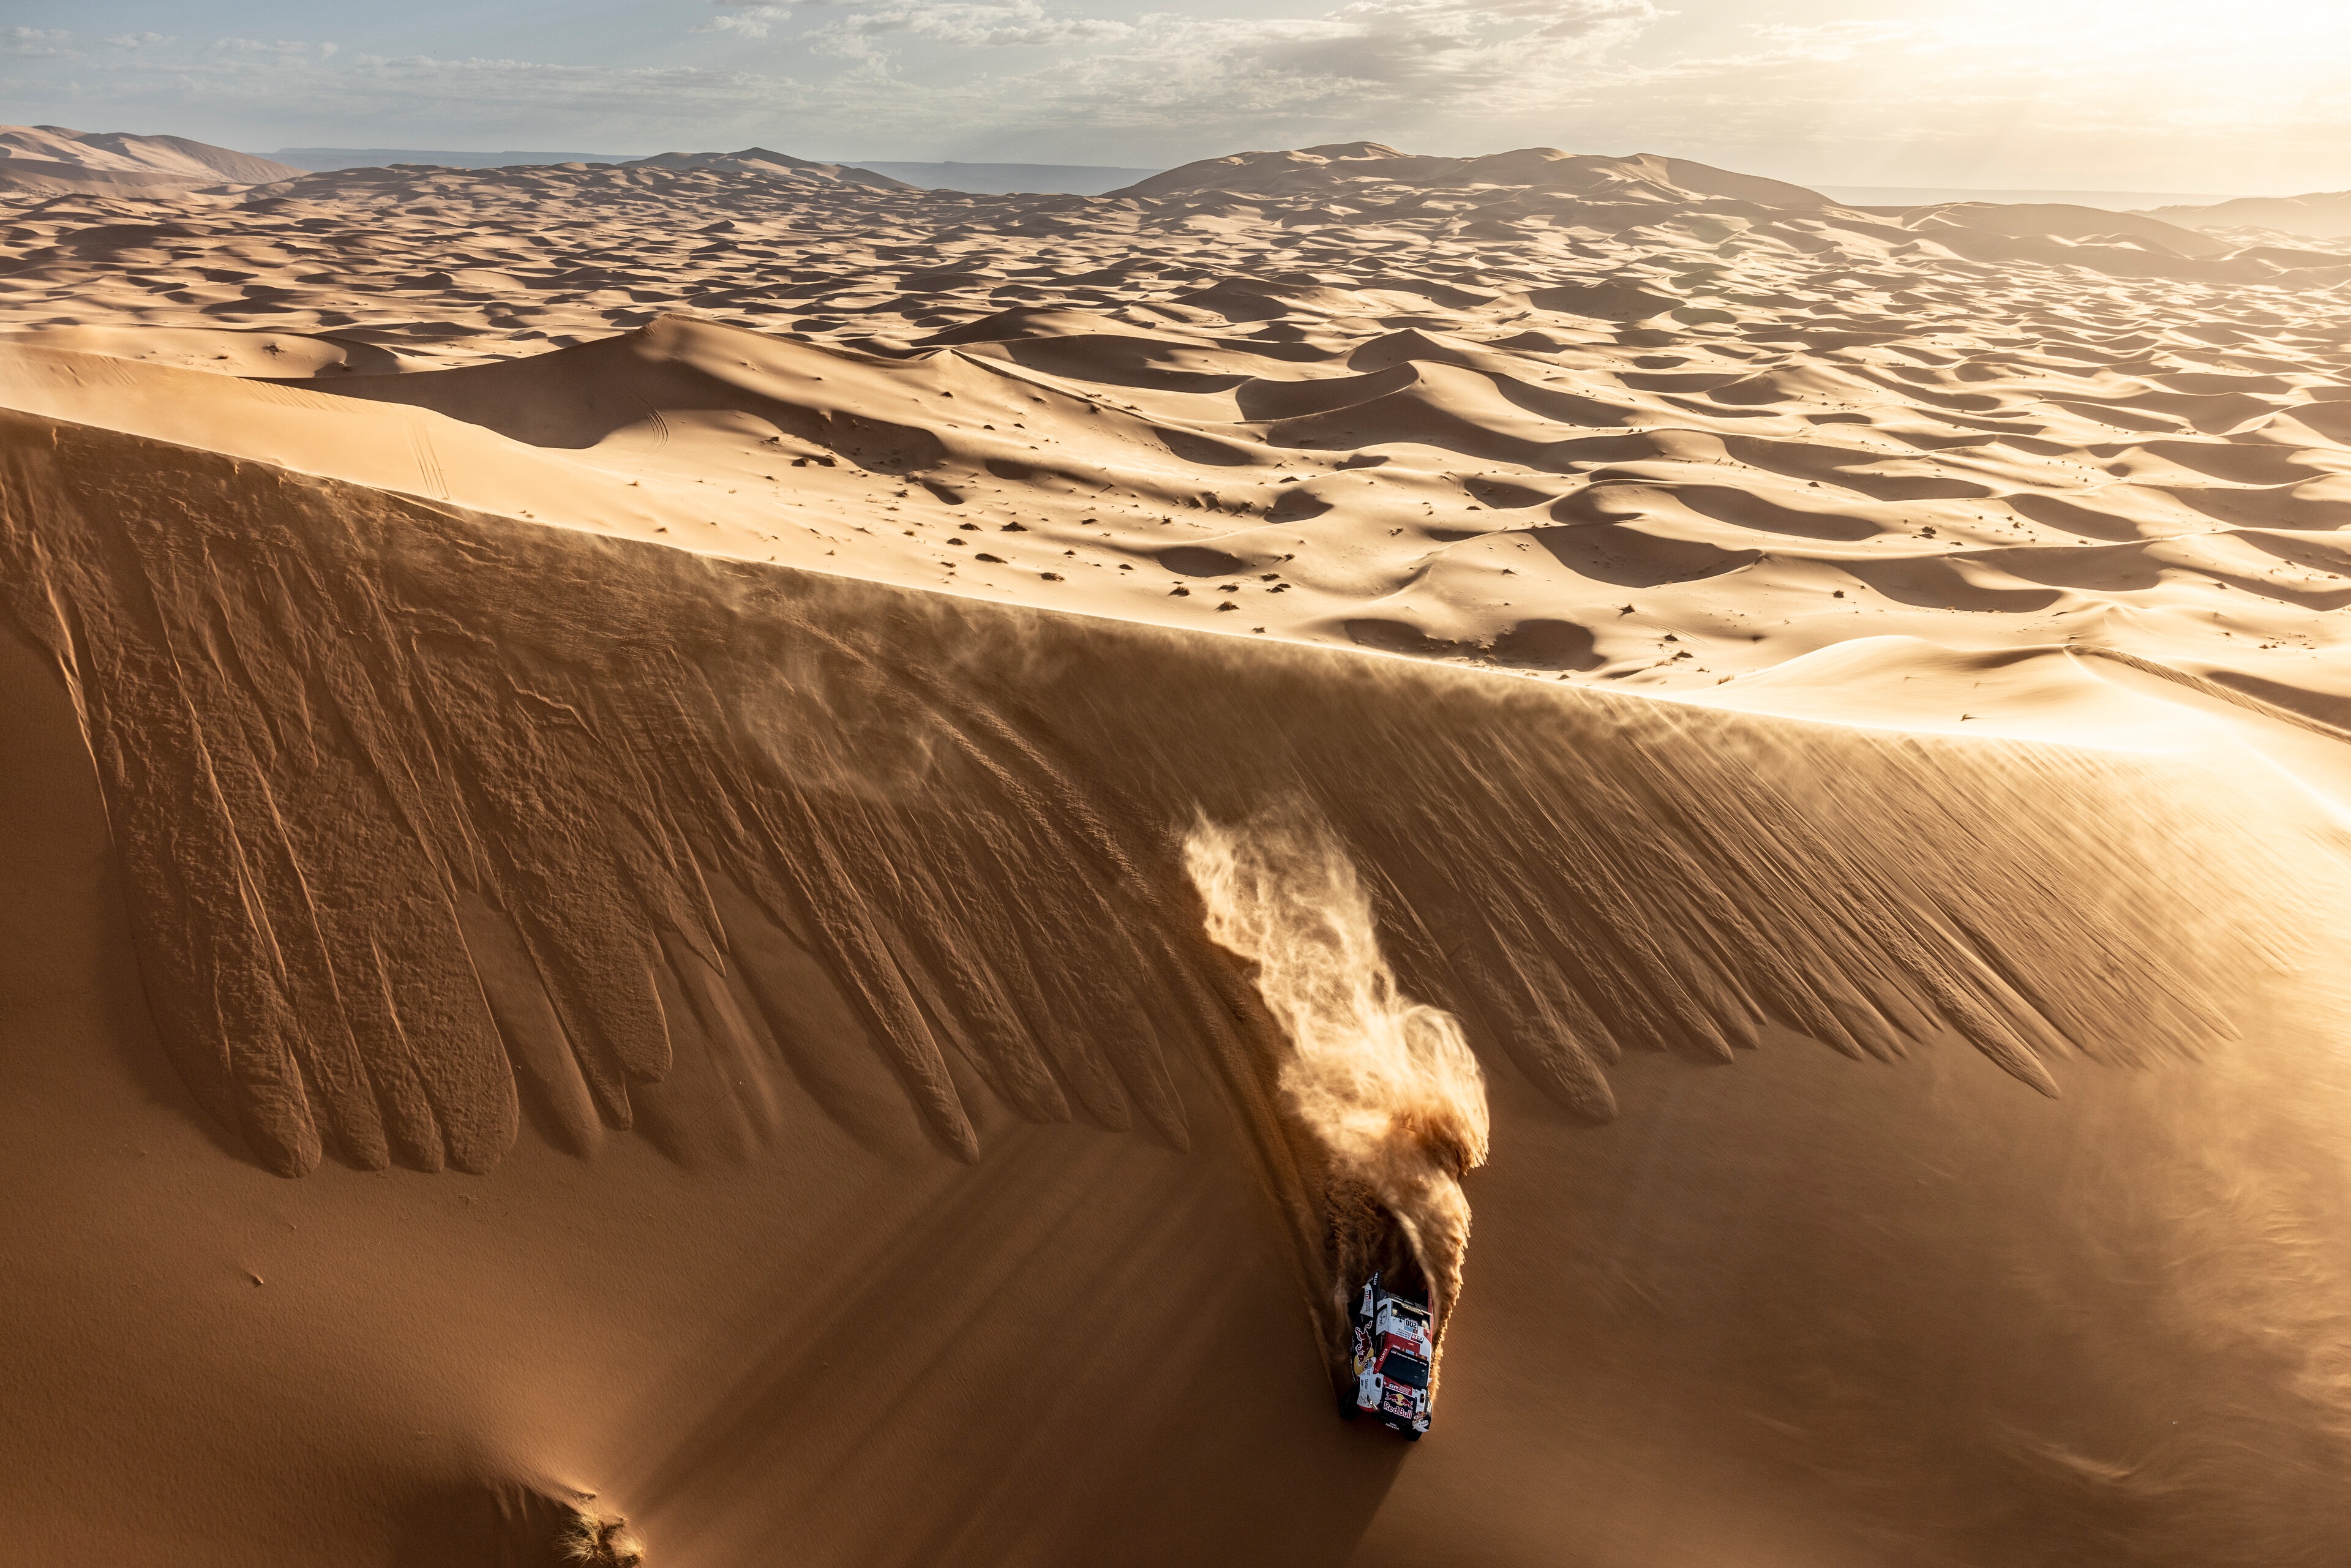 Dakar organizers have made major changes to the course this year, making it more difficult than ever